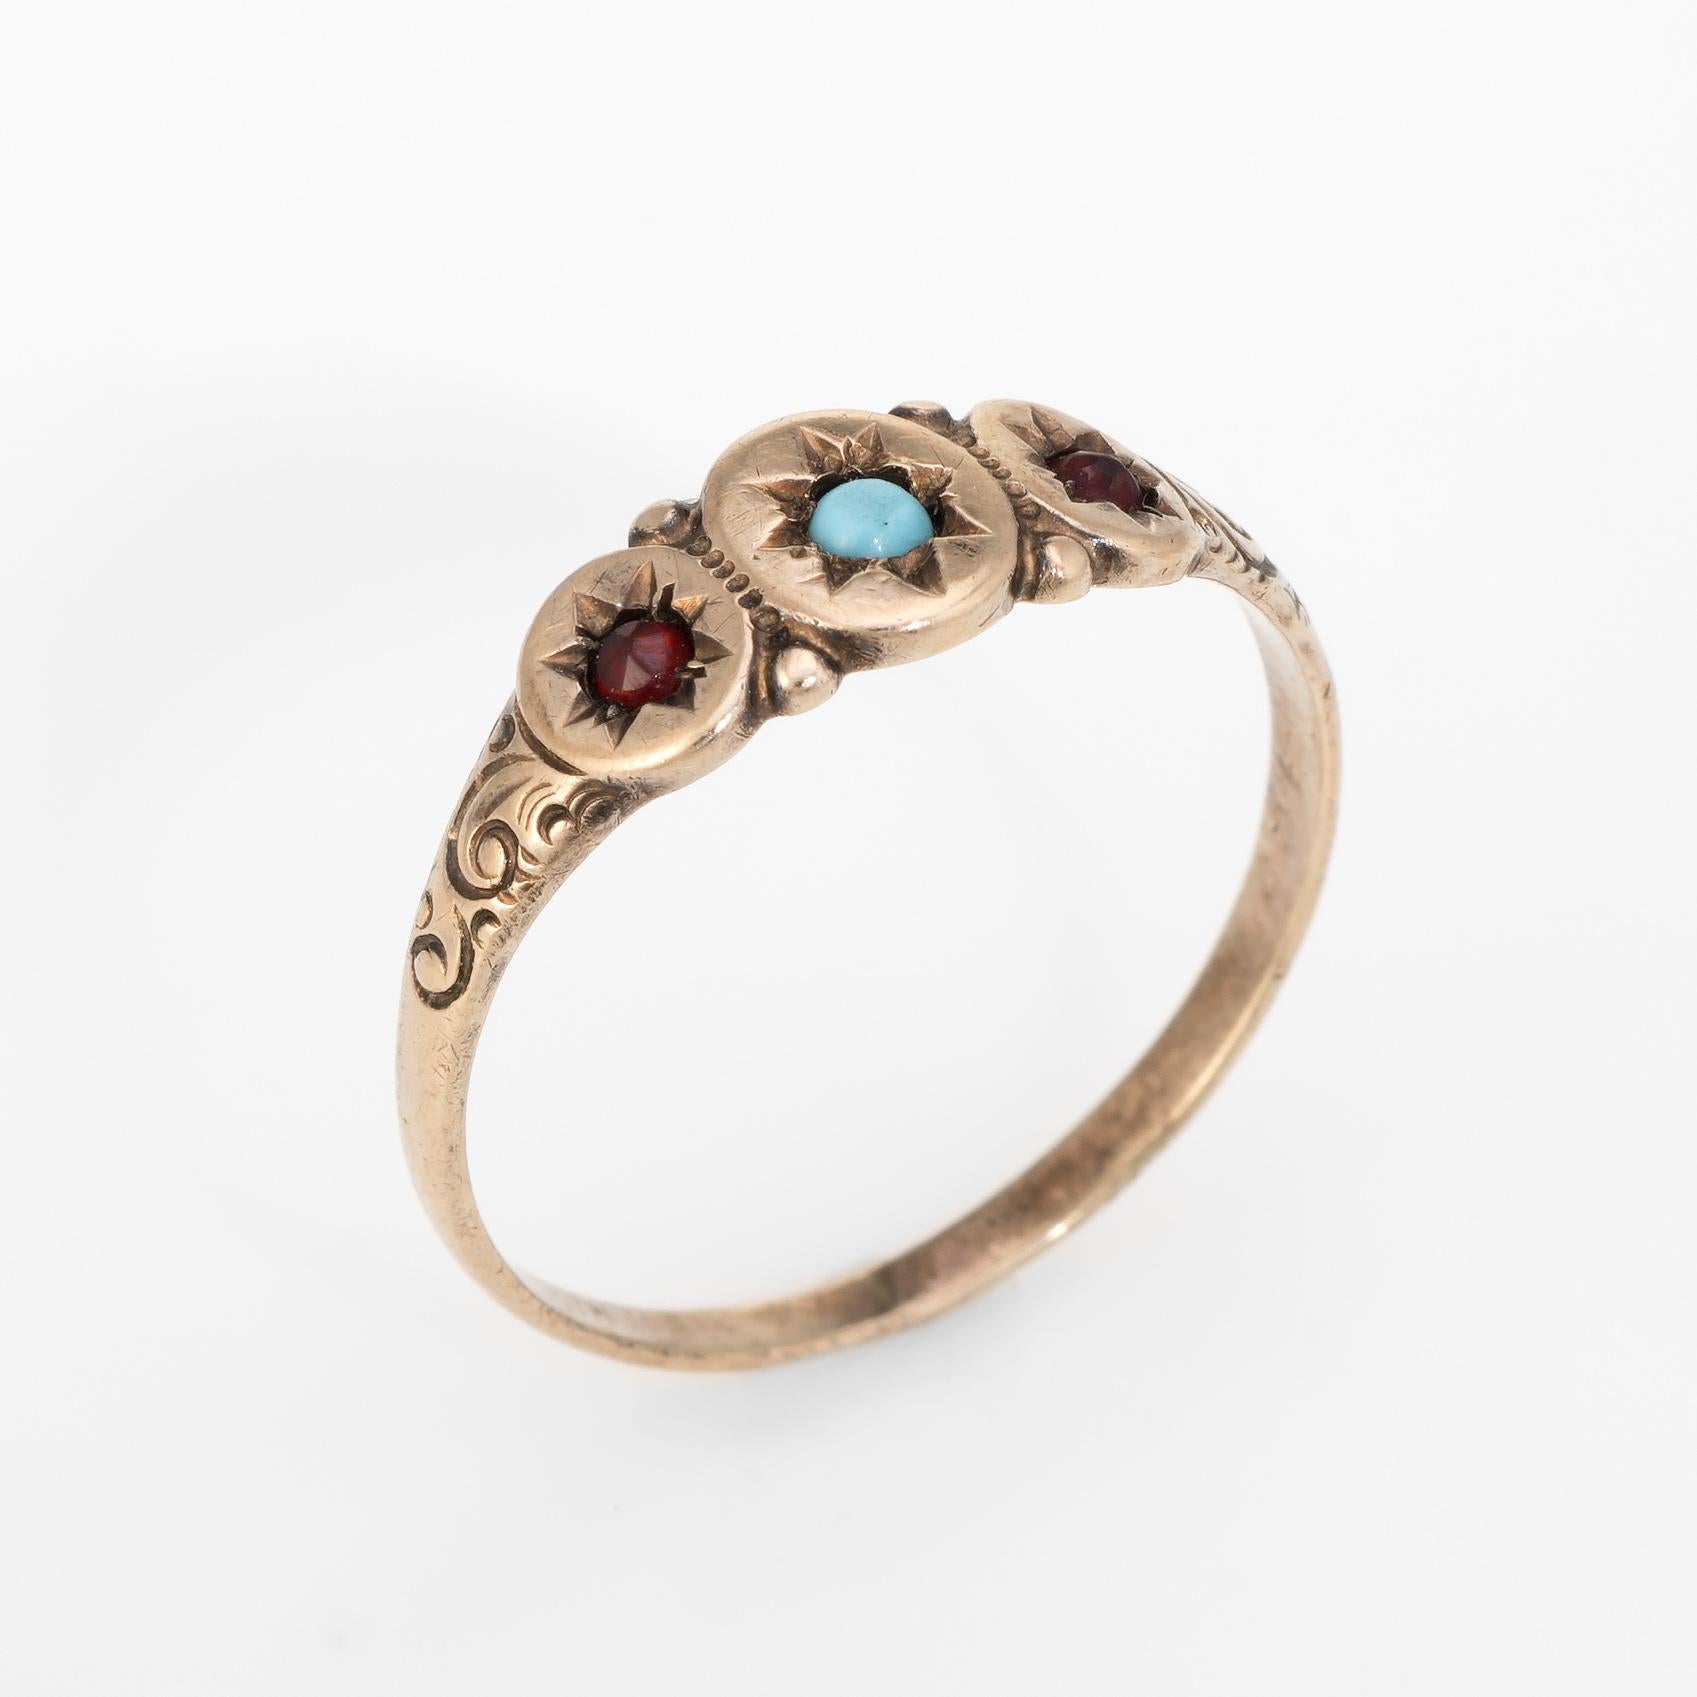 Victorian era signet ring (circa 1880s to 1900s), crafted in 10 karat rose gold.

1 x 2mm turquoise is accented with 2 x 1mm garnets.  

The ring is in excellent condition.

Particulars:

Weight: 1.4 grams

Stones: 1 x 2mm turquoise is accented with